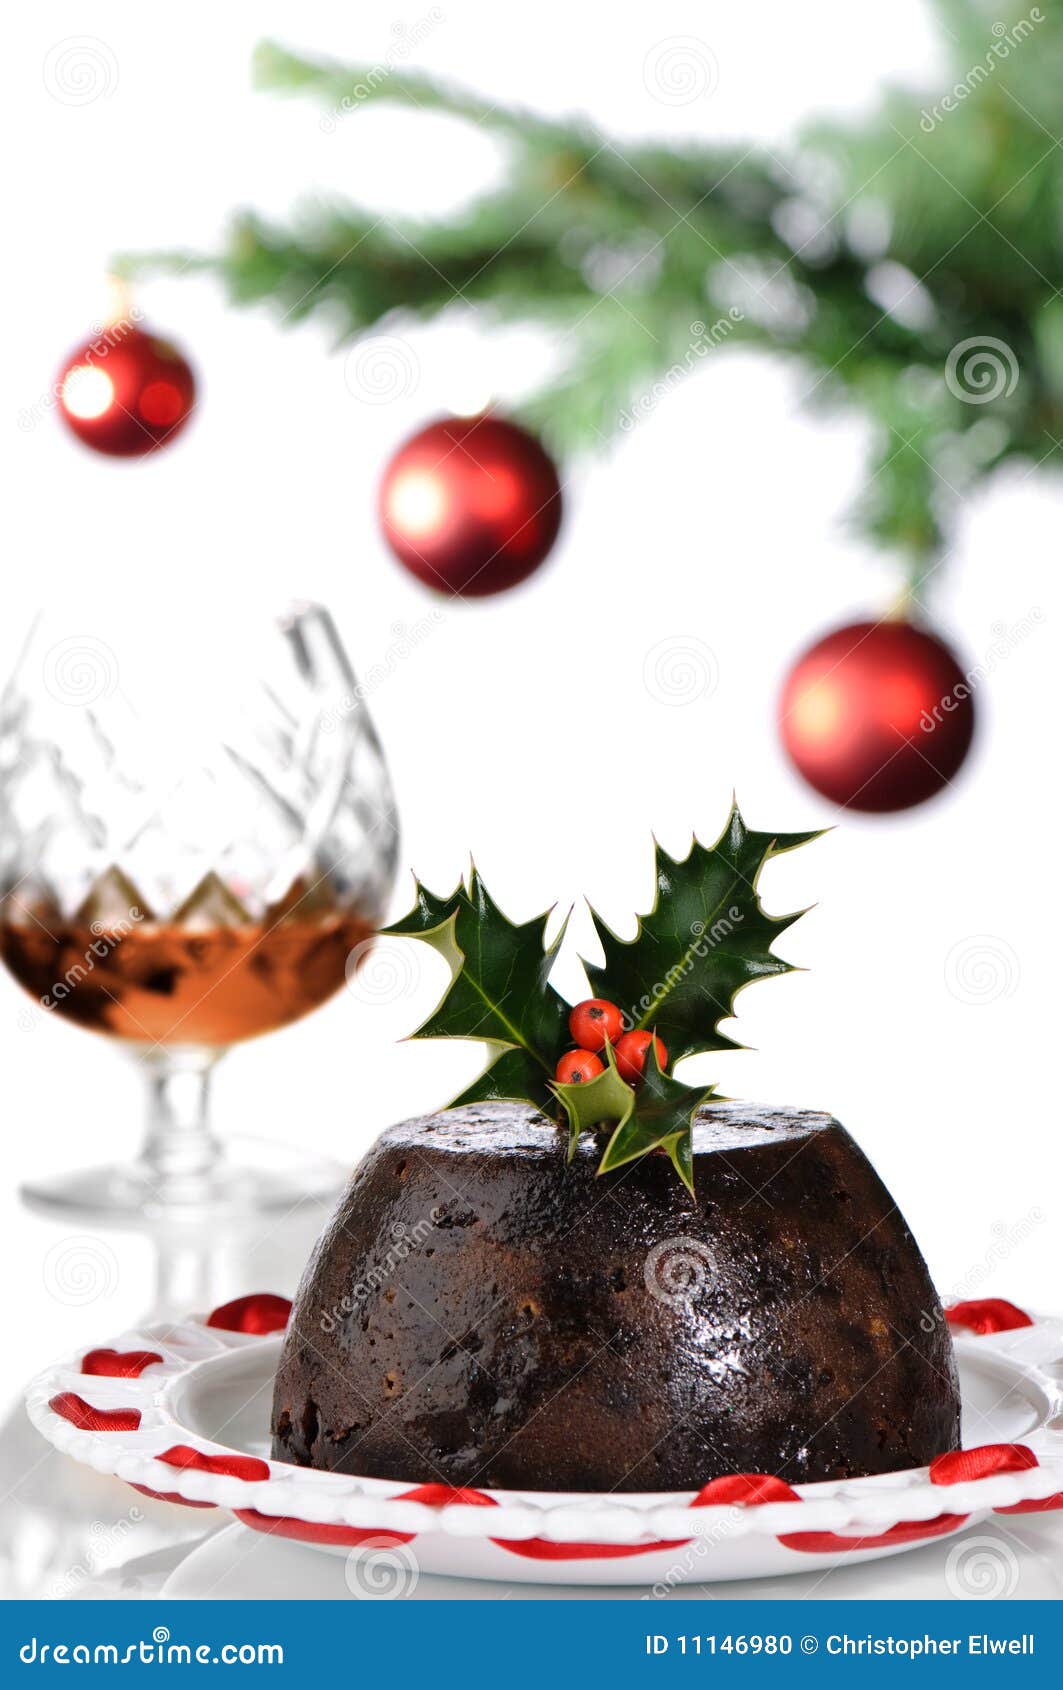 Christmas Pudding with Brandy Stock Photo - Image of christmas, baubles ...